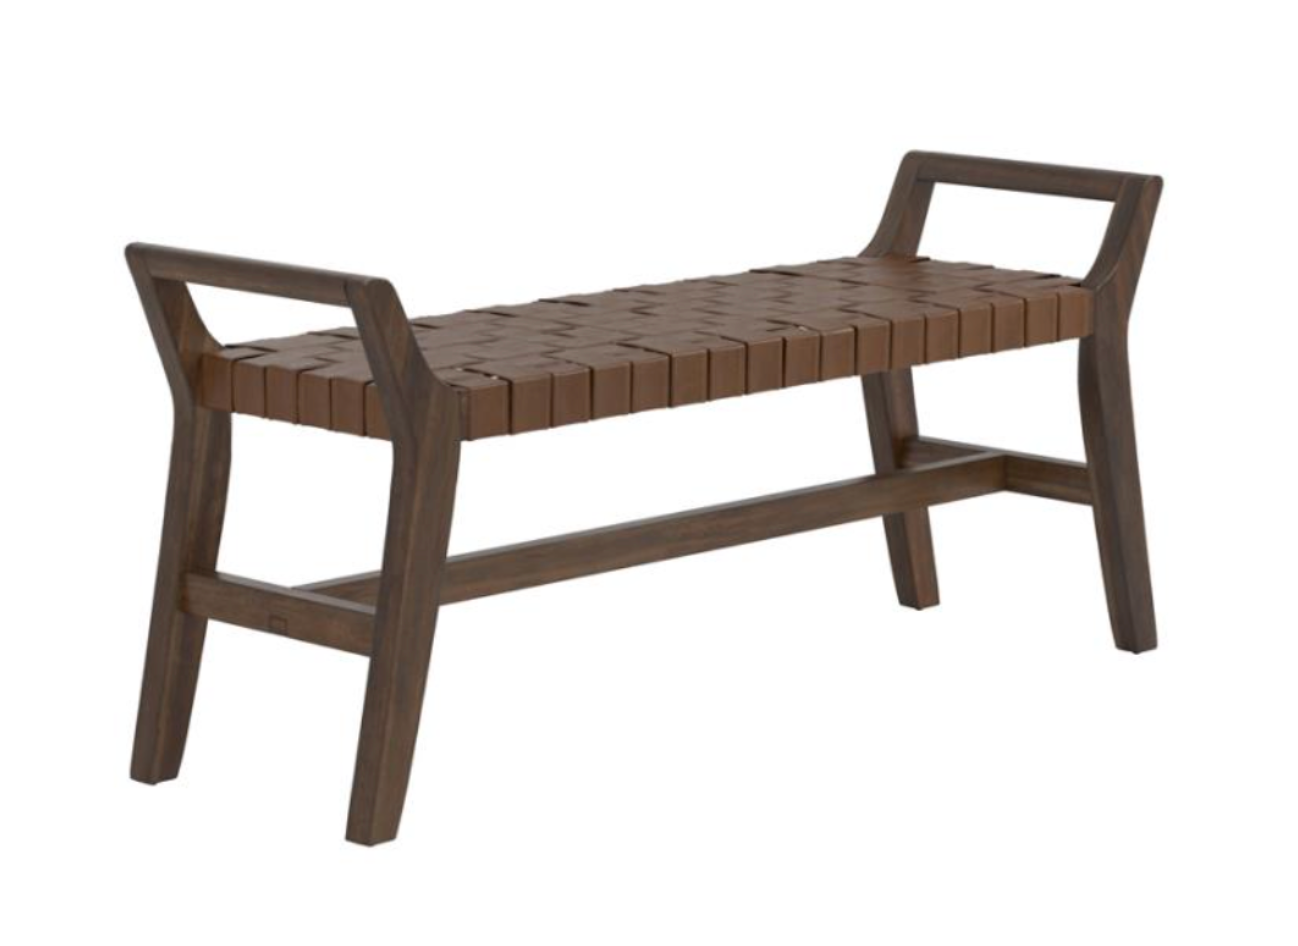 12 Month Rental Plan |  Woven Walnut Bench | From $25/mo